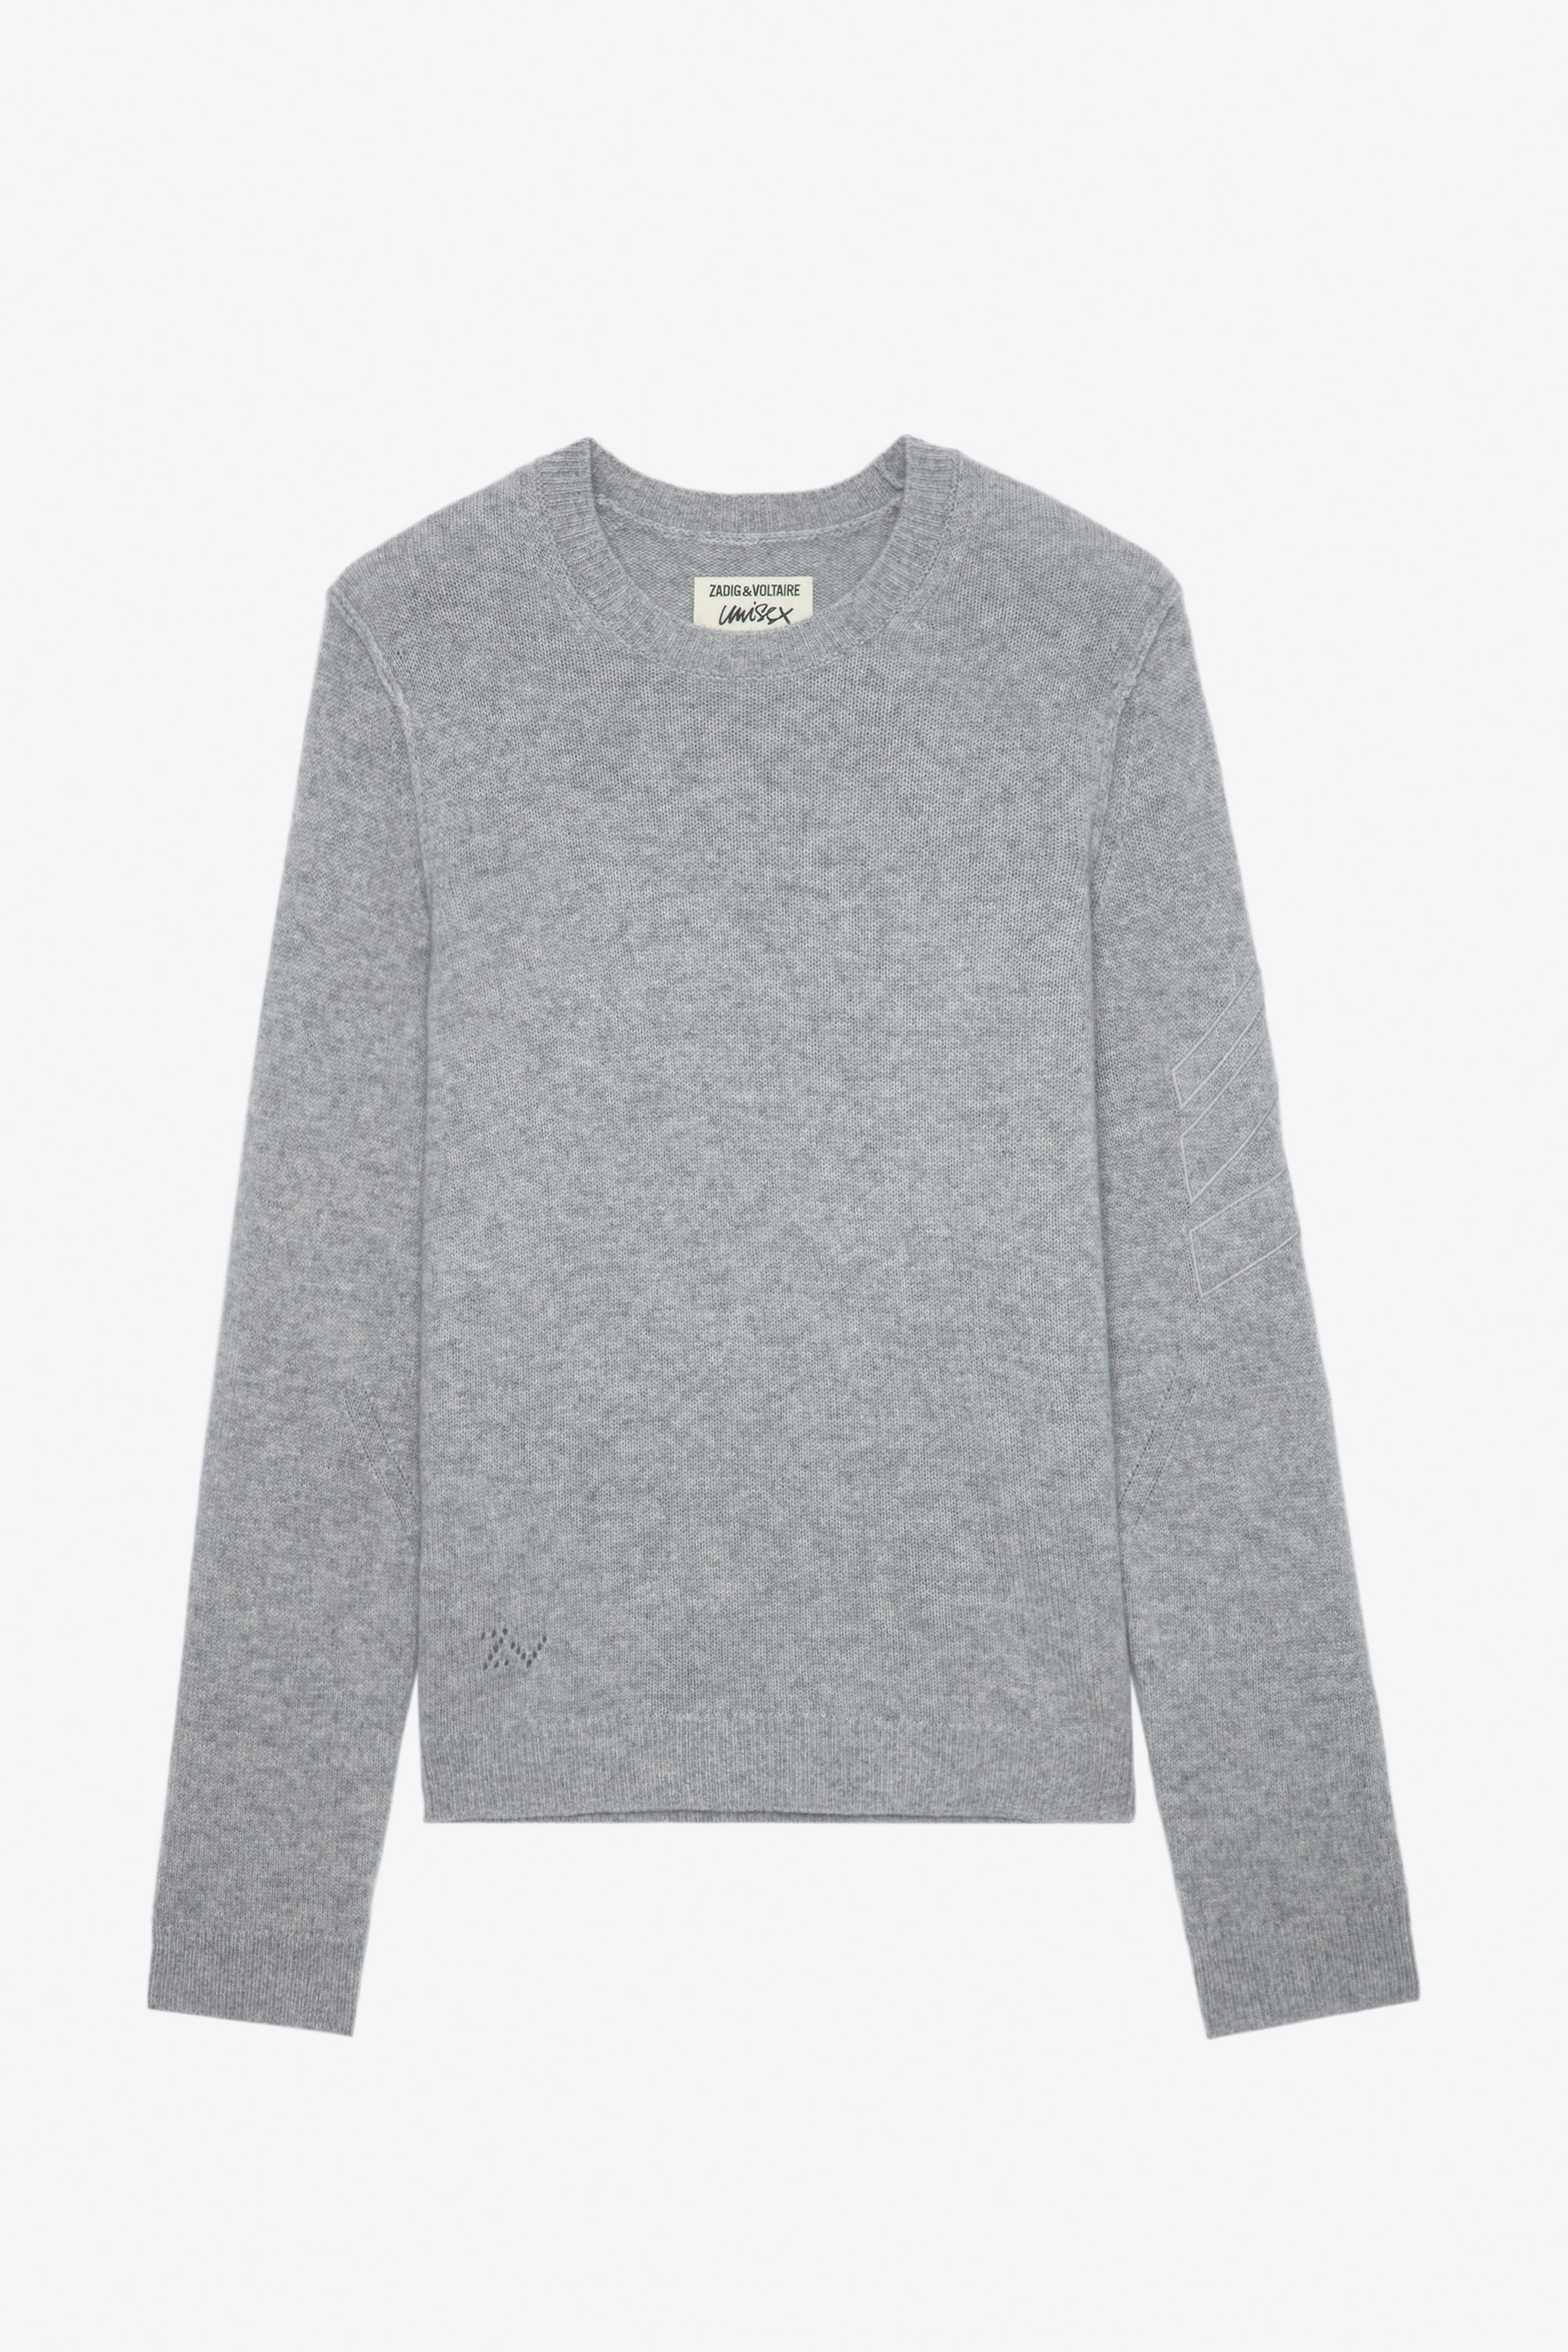 Kennedy Cashmere Sweater - Unisex light marl grey cashmere sweater with arrows on the sleeve.